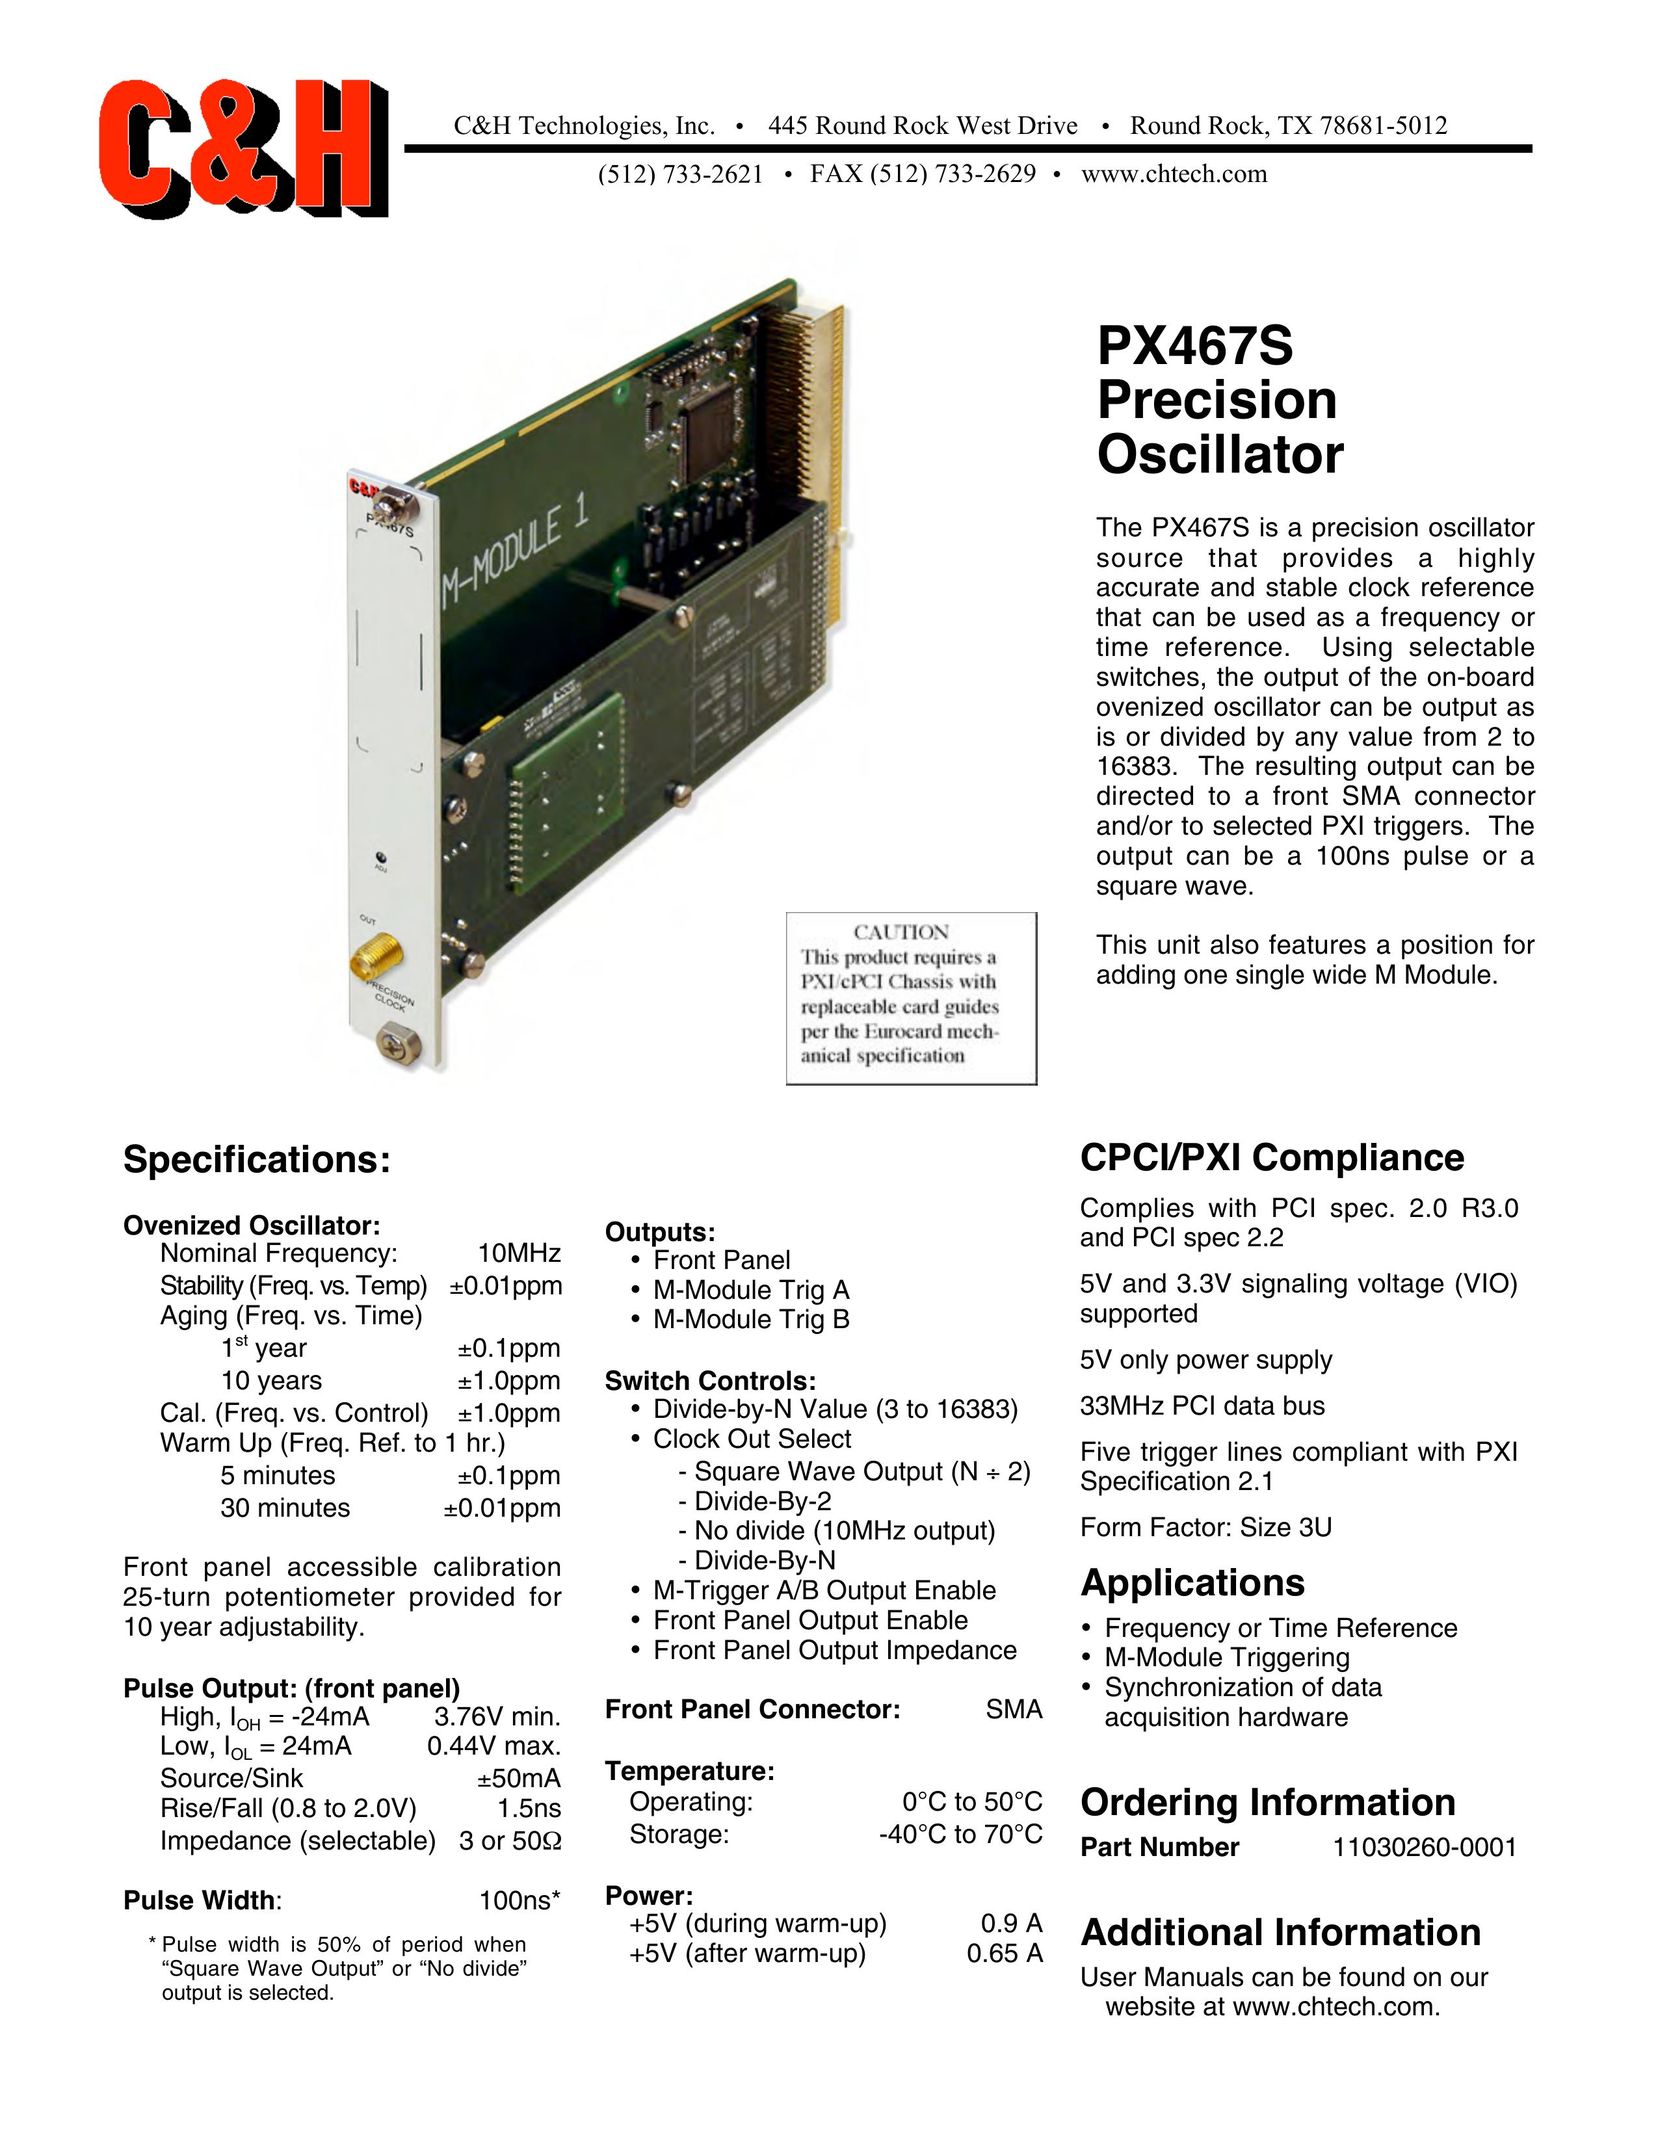 CH Tech PX467S Network Card User Manual